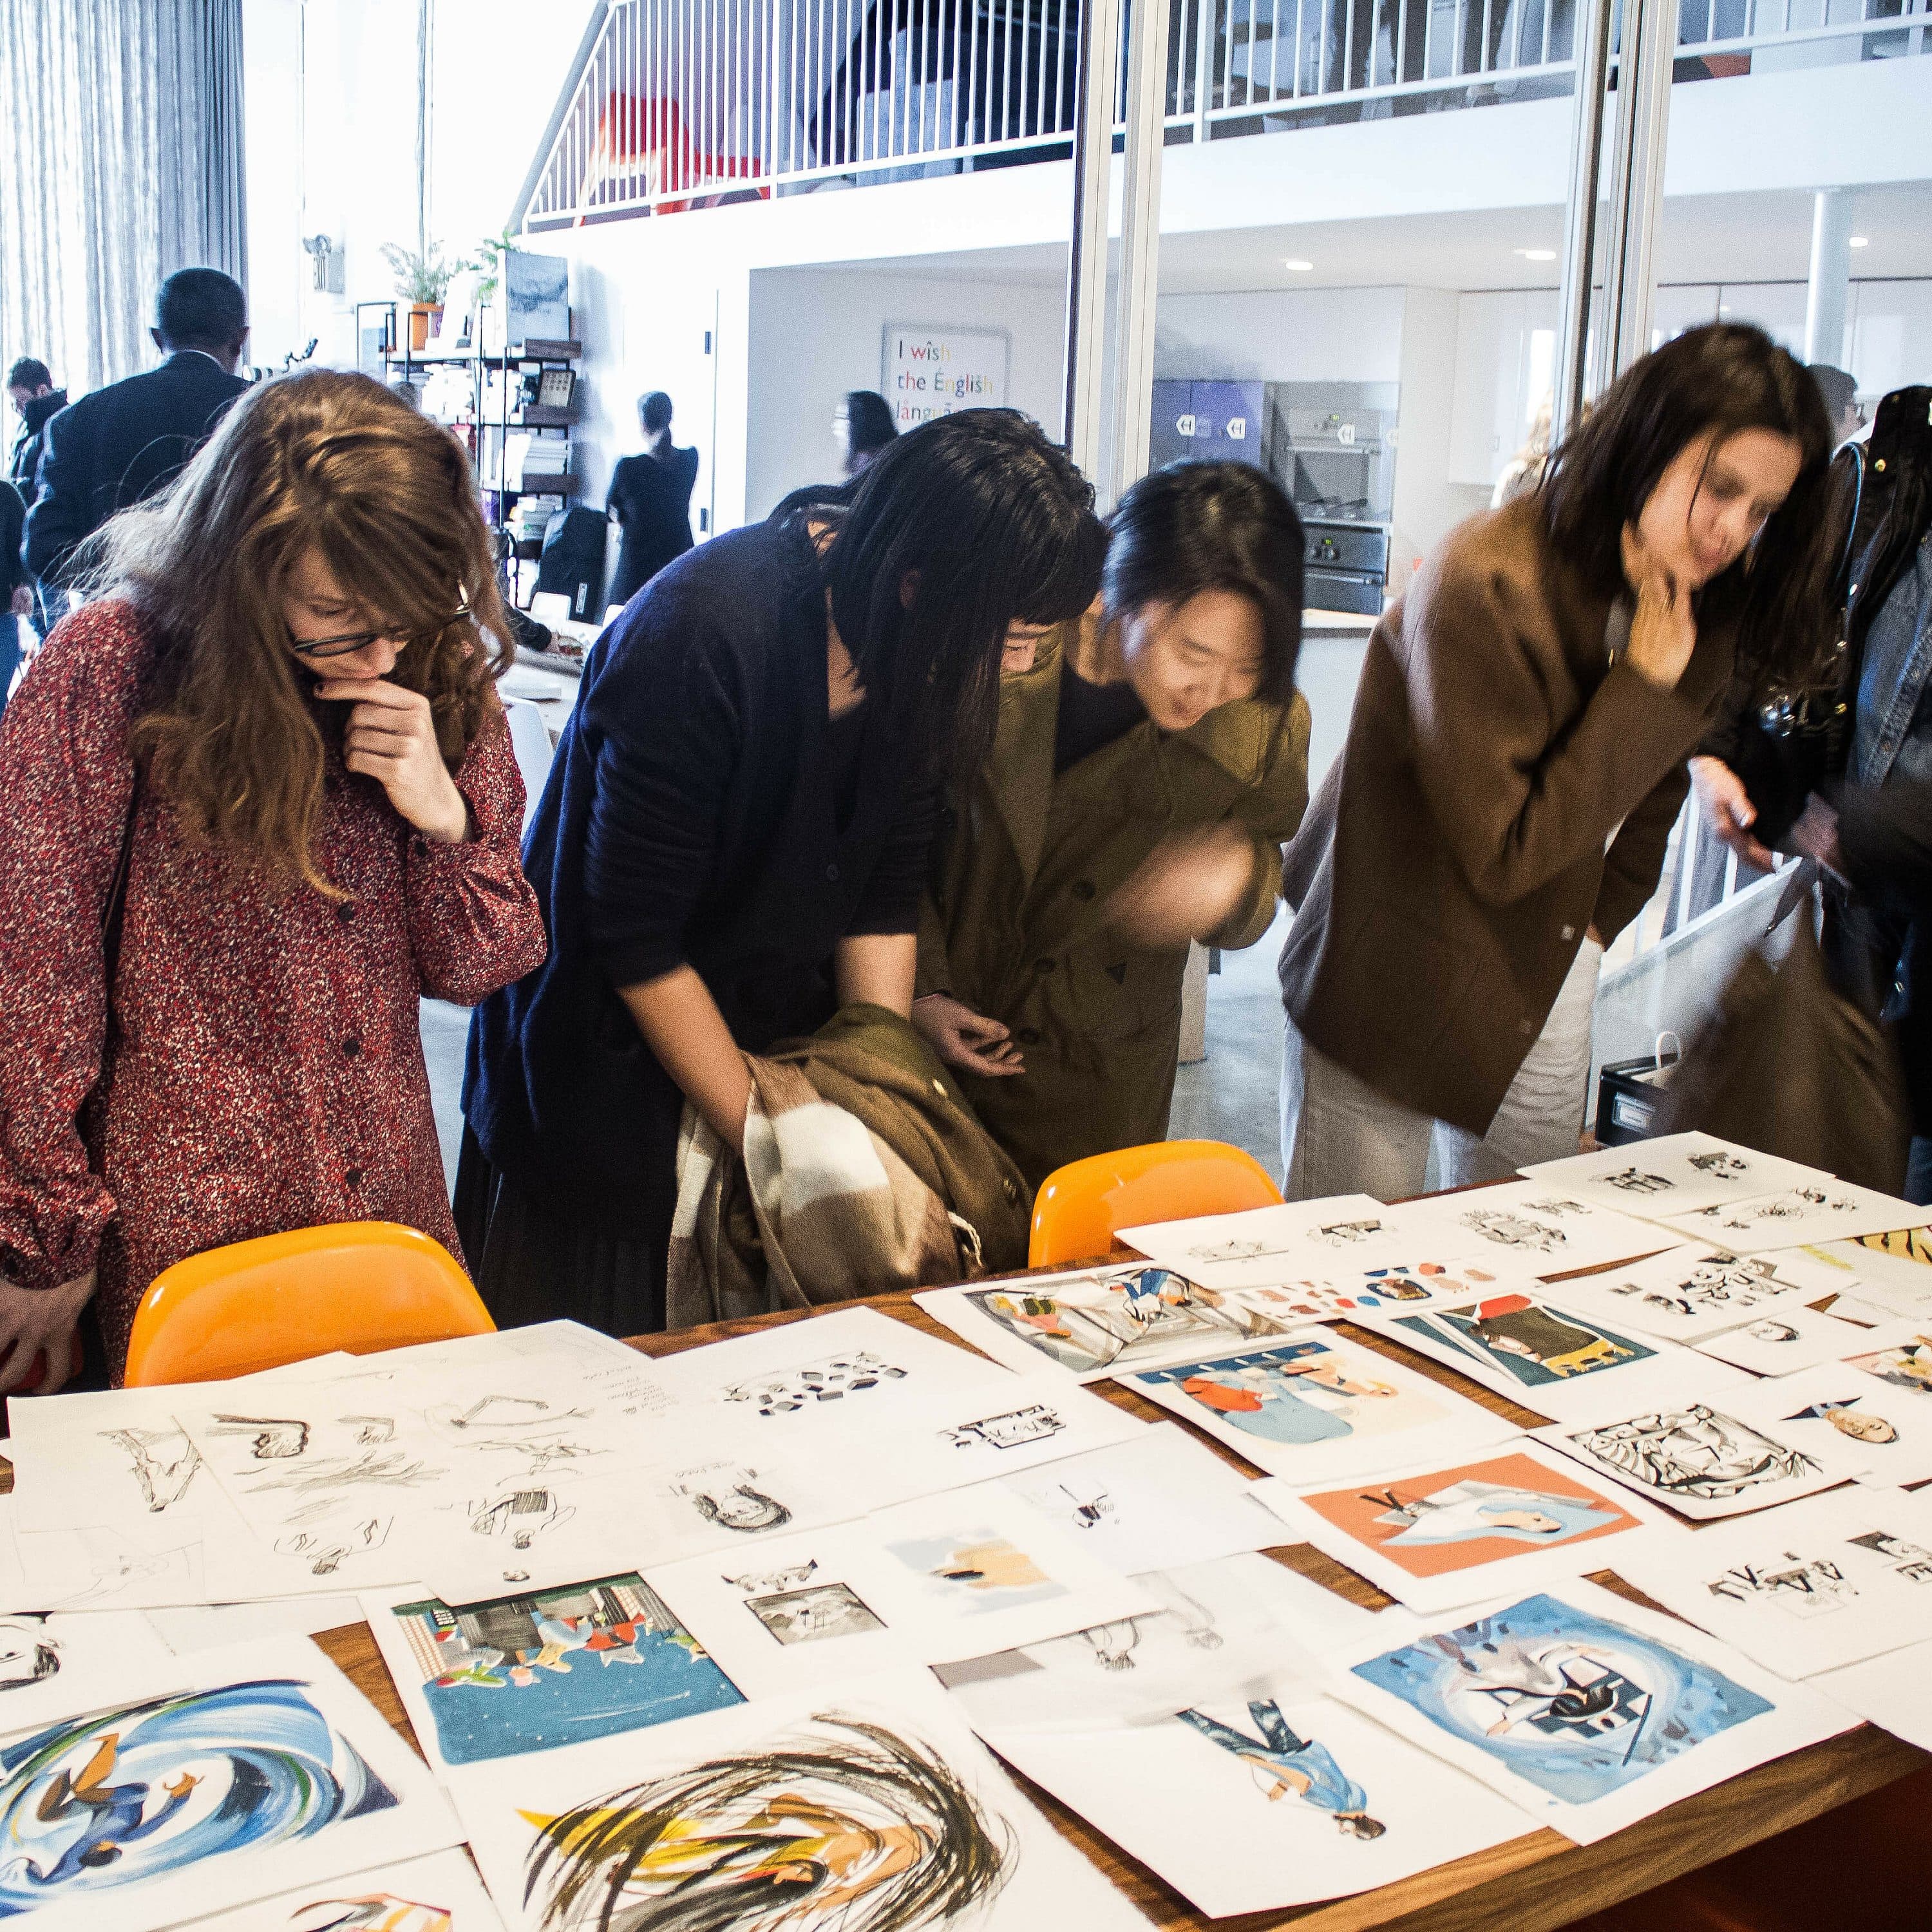 A group of people is gathered around a table filled with various sketches and artwork. They seem to be closely observing and discussing the pieces. The setting appears to be a well-lit, creative studio space with other individuals in the background.